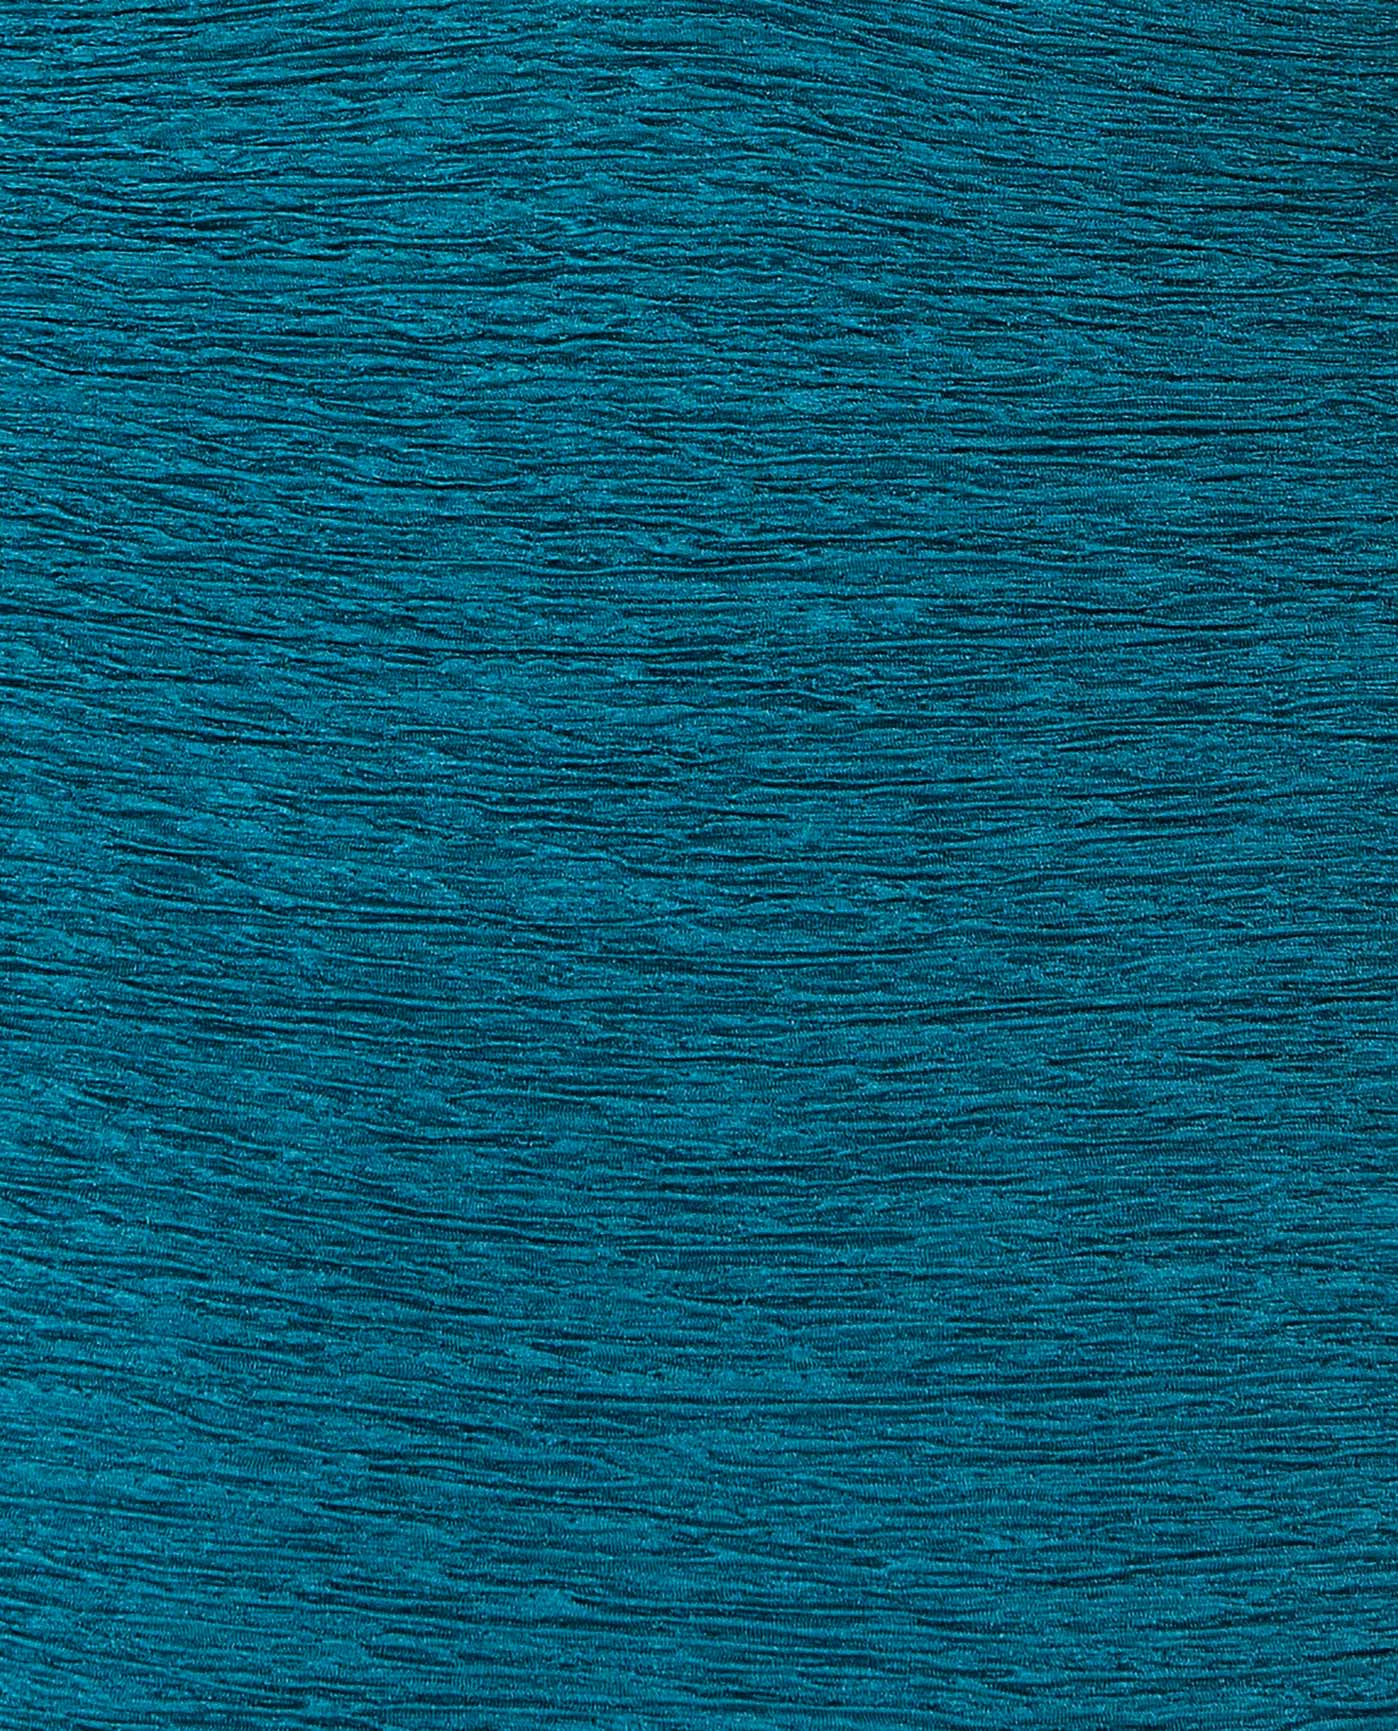 FABRIC SWATCH VIEW OF CHLORINE RESISTANT KRINKLE TEXTURED COLOR BLOCK TWIST FRONT PLUS SIZE ONE PIECE | KRINKLE COSMO BLUE